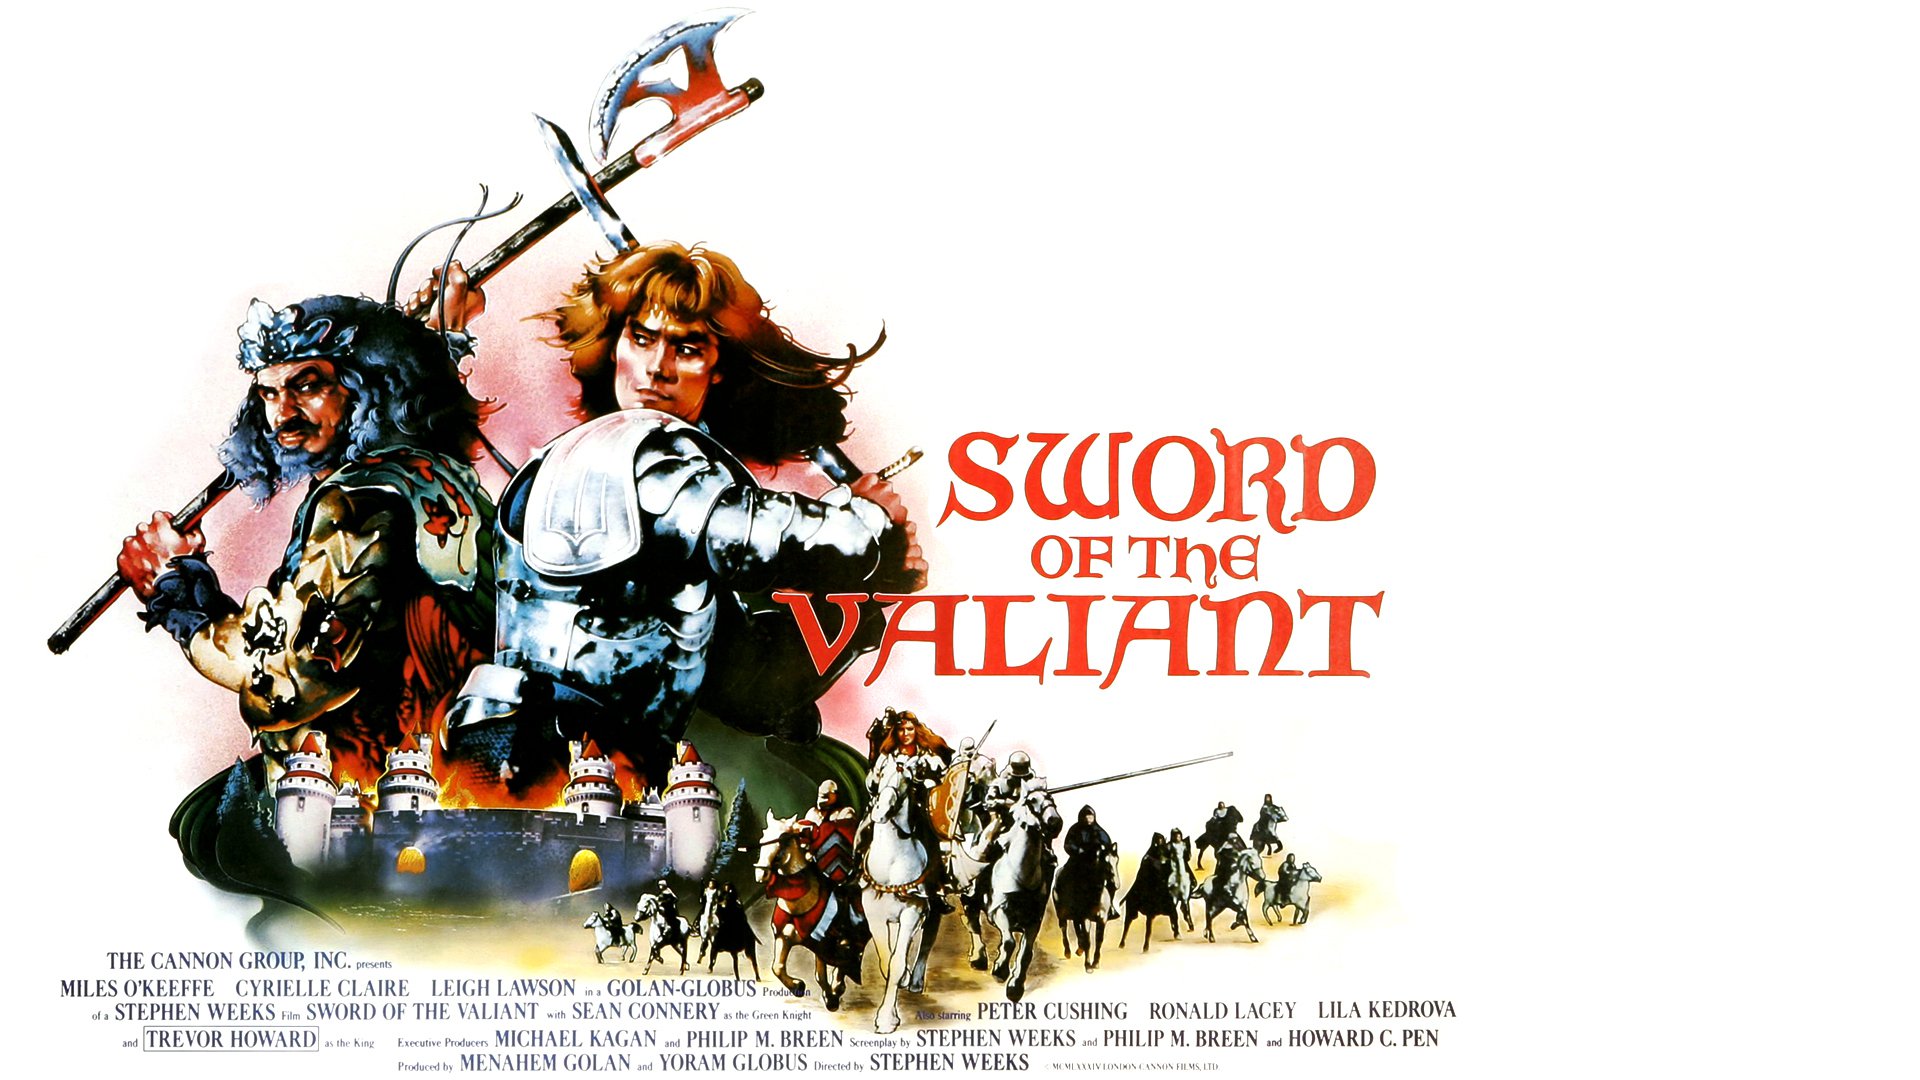 Sword of the Valiant: The Legend of Sir Gawain and the Green Knight